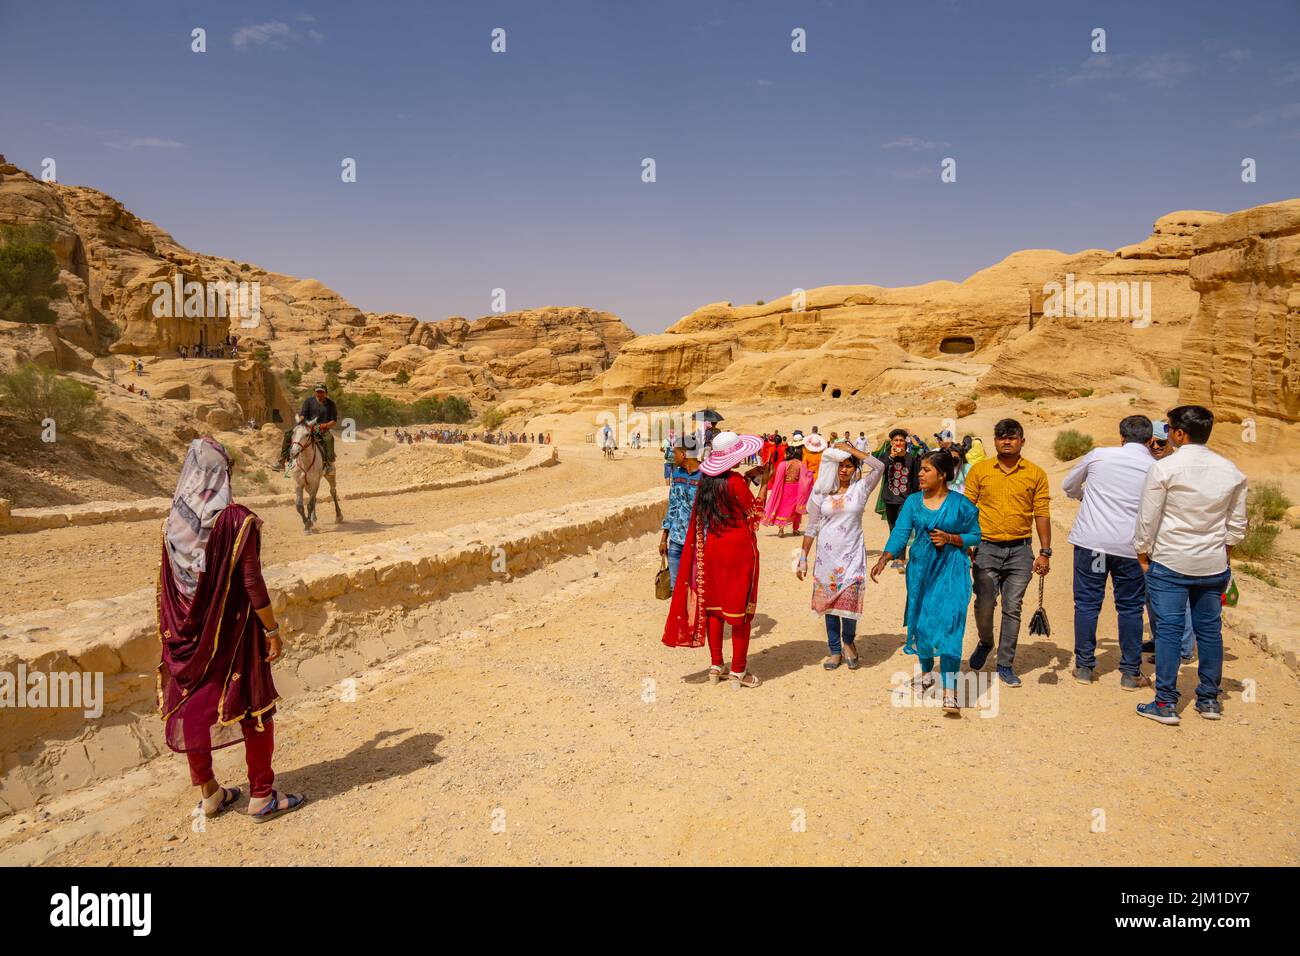 Crowds of people walking down the entrance road to Al-Siq and Petra in Wadi Musa Jordan Stock Photo